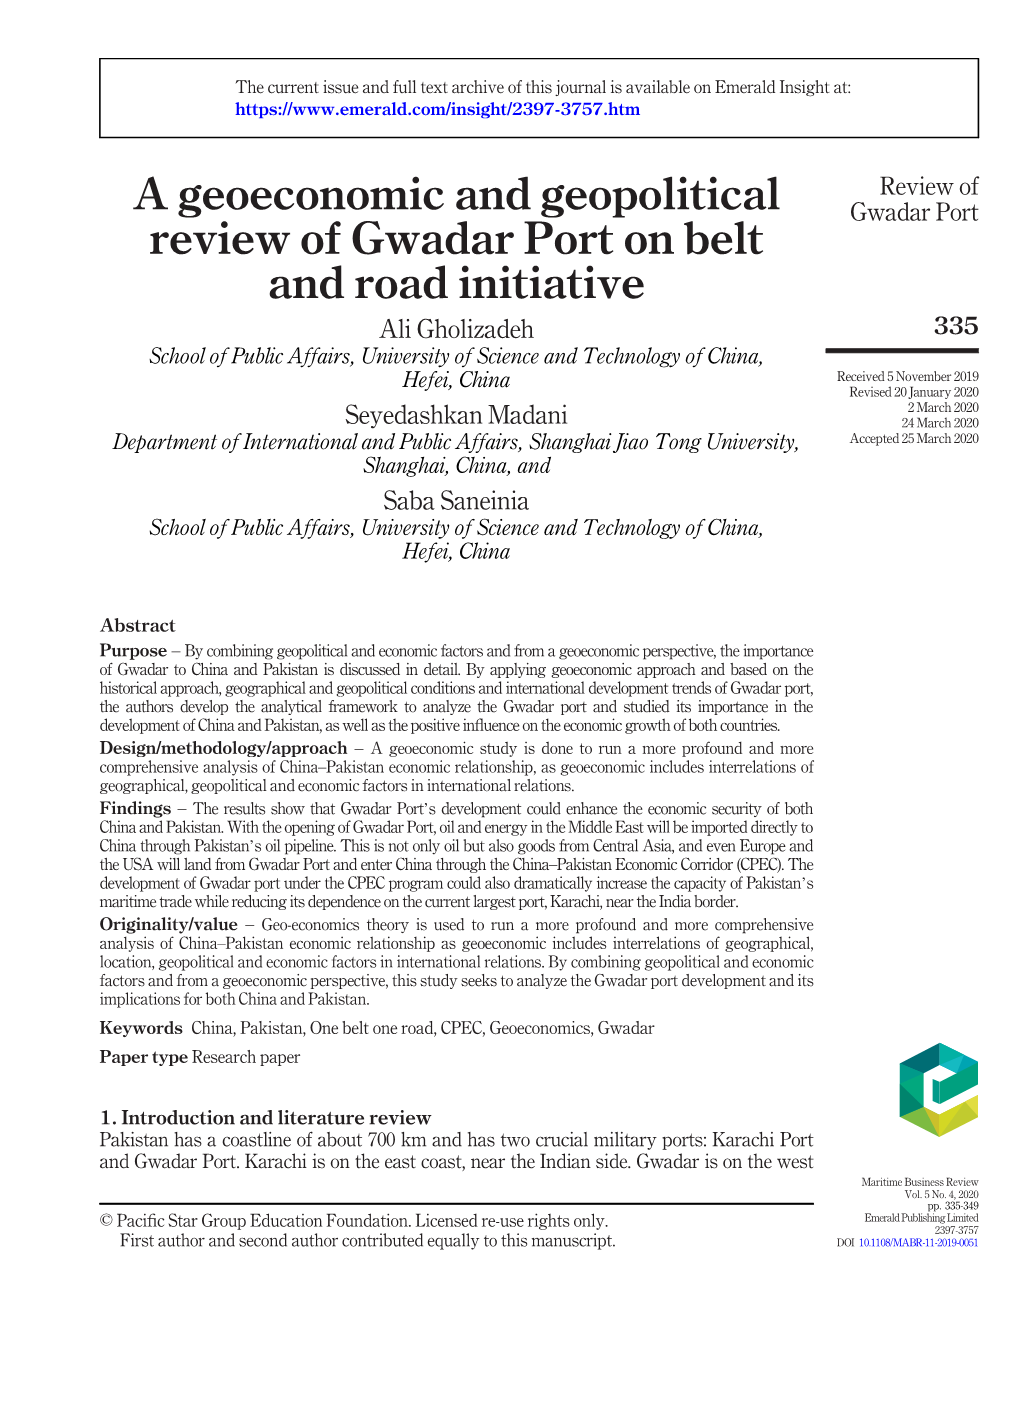 A Geoeconomic and Geopolitical Review of Gwadar Port on Belt And